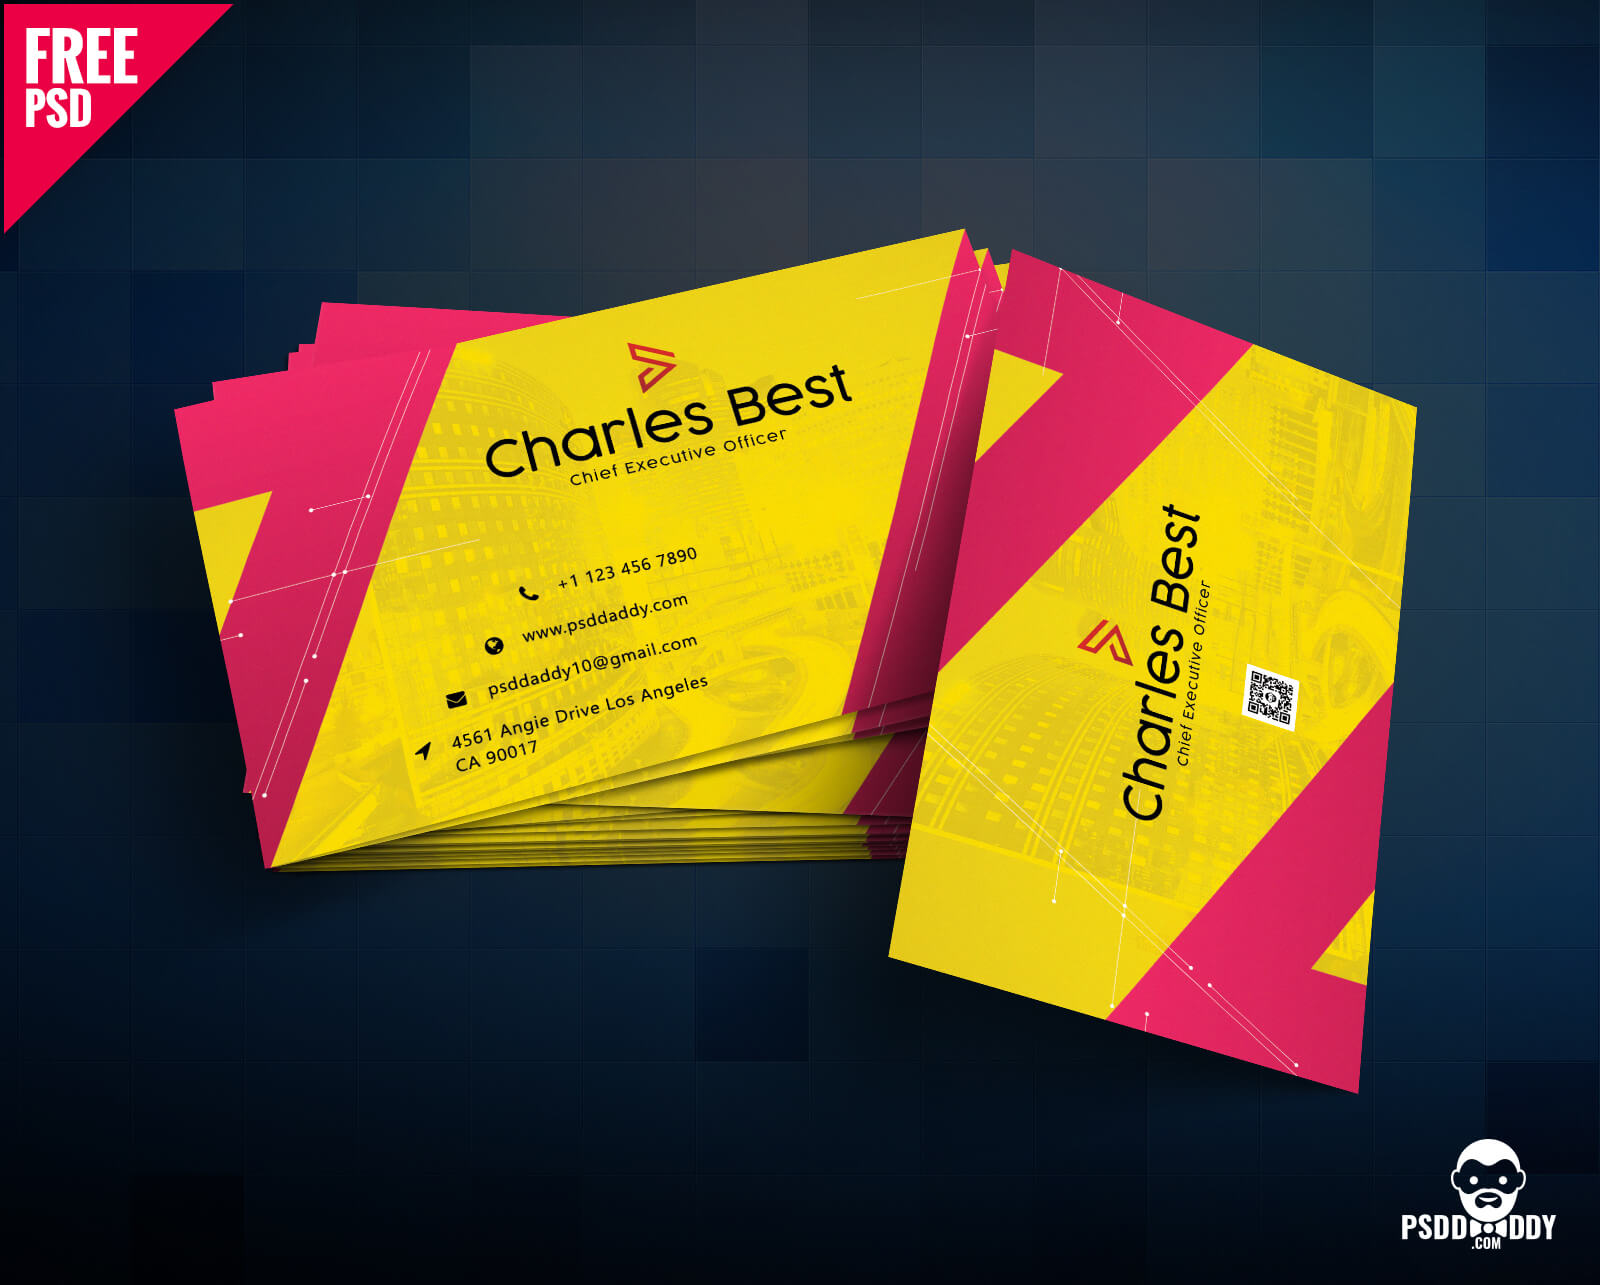 Download] Creative Business Card Free Psd | Psddaddy With Template Name Card Psd